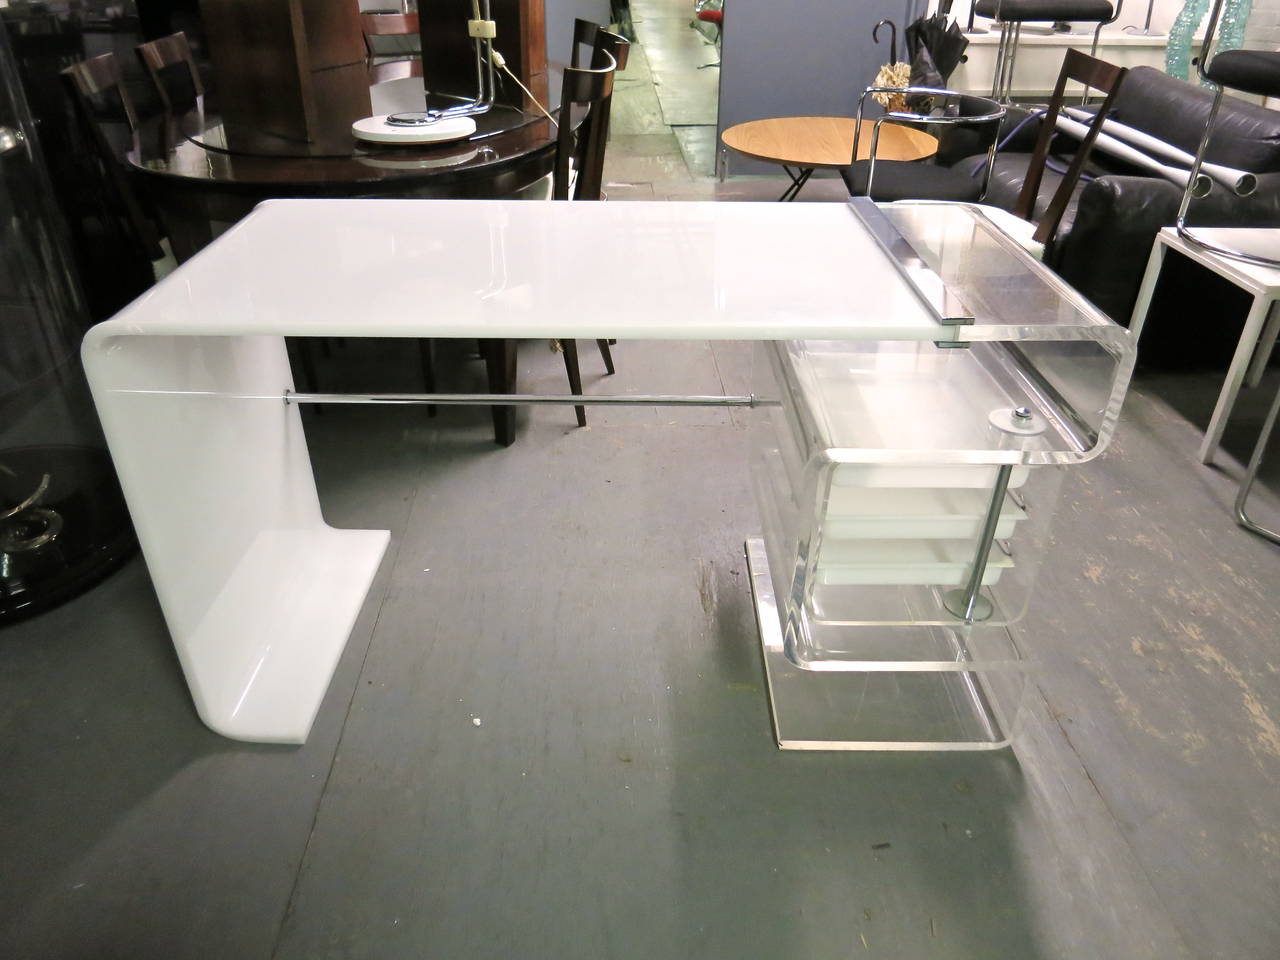 Desk in molded opaque white and clear lucite with three drawers that are encased in a clear lucite box that can be tucked into the desk or swing around for easy access.